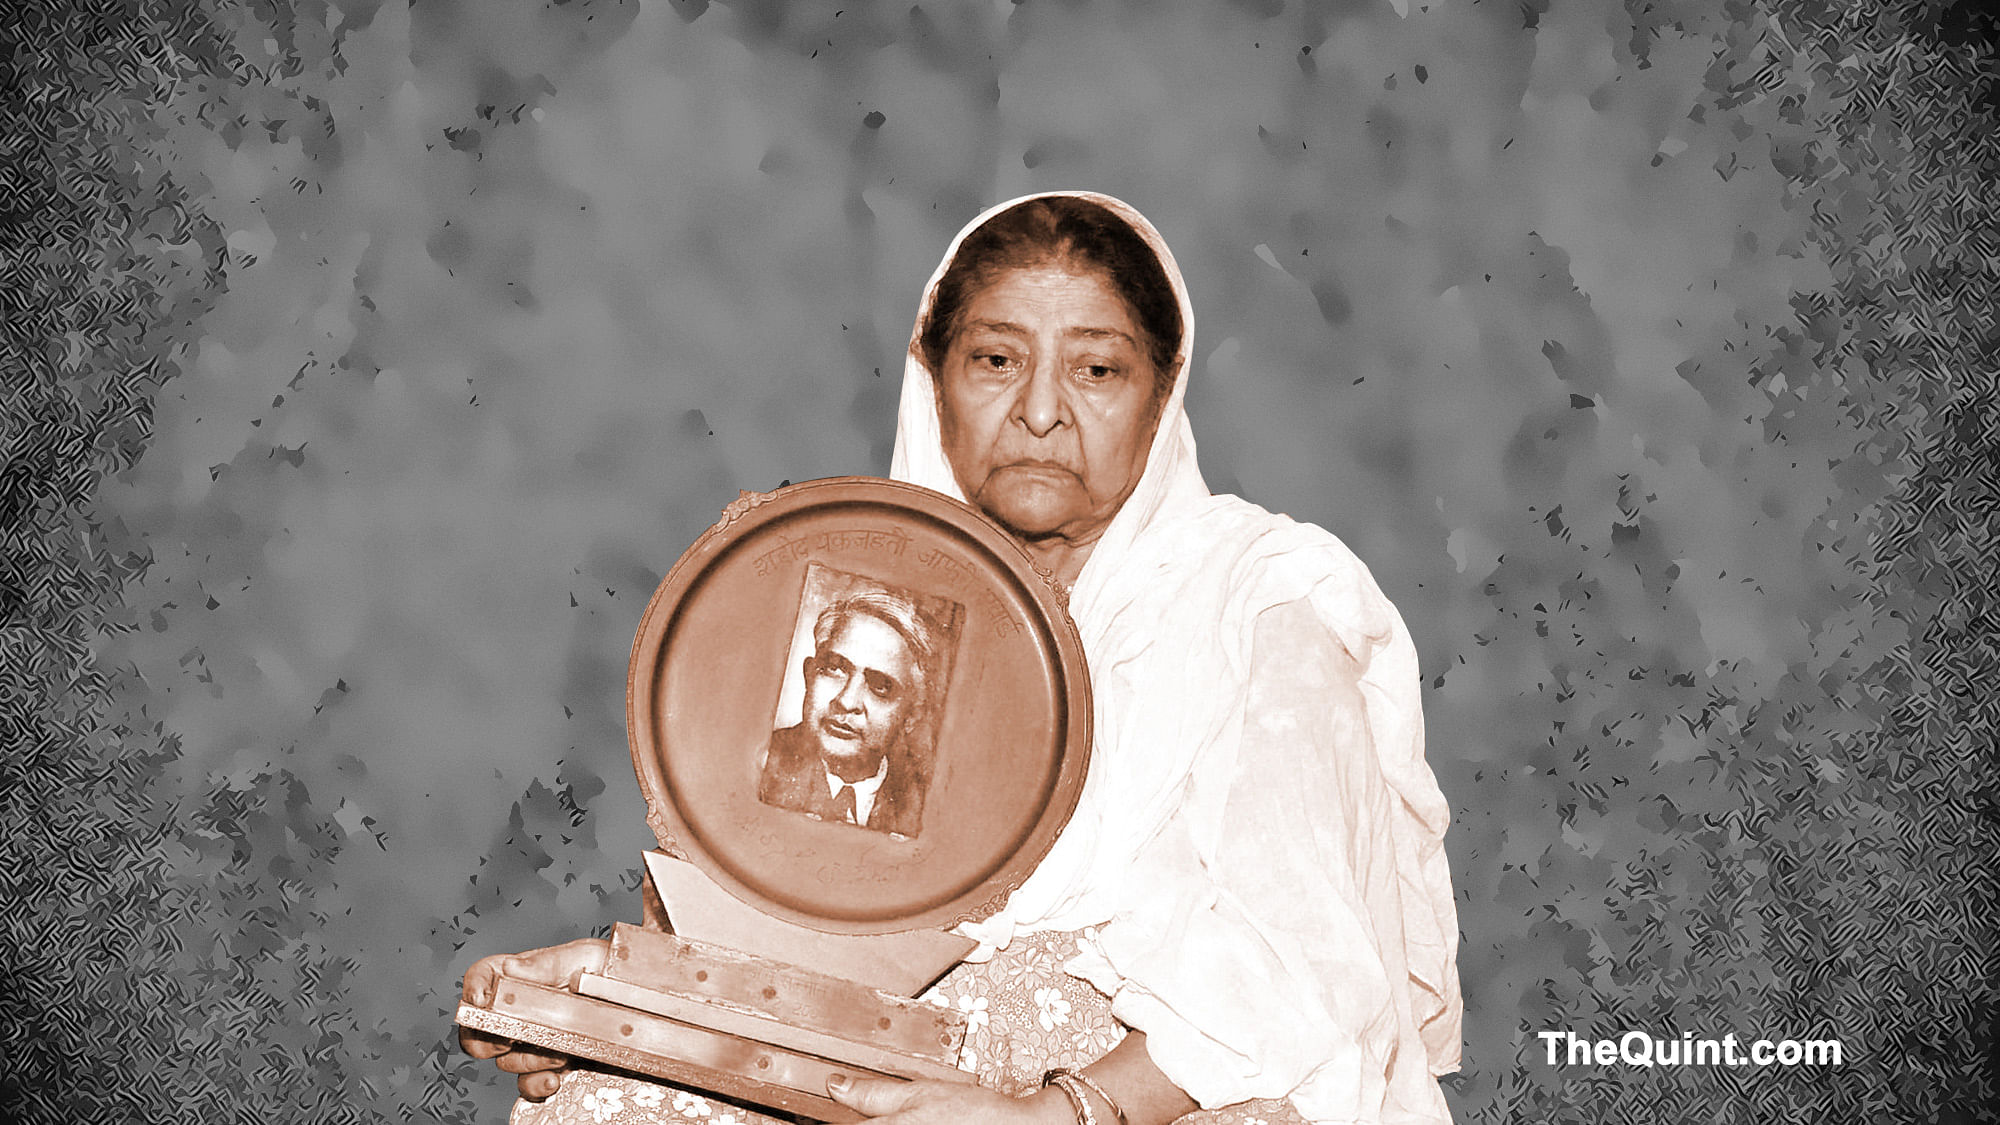 

Zakia Jafri, wife of slain Congress MP Ehsan Jafri, showing her husband’s photo while reacting to the Gulbarg Society verdict, in Surat, June 2, 2016. (Photo: PTI/ Altered by <b>The Quint</b>)